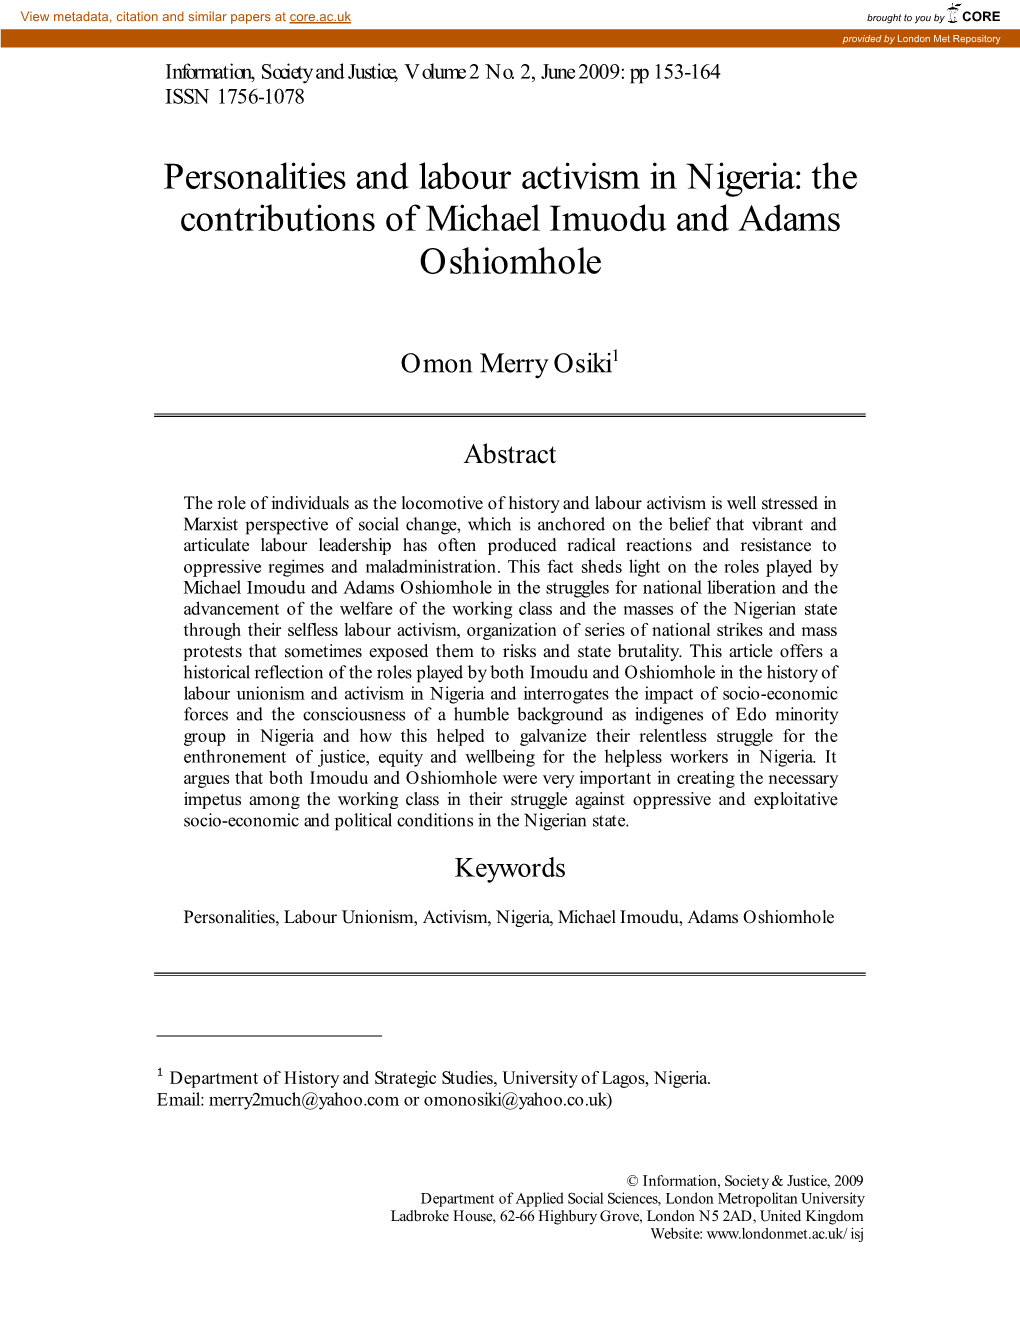 Personalities and Labour Activism in Nigeria: the Contributions of Michael Imuodu and Adams Oshiomhole